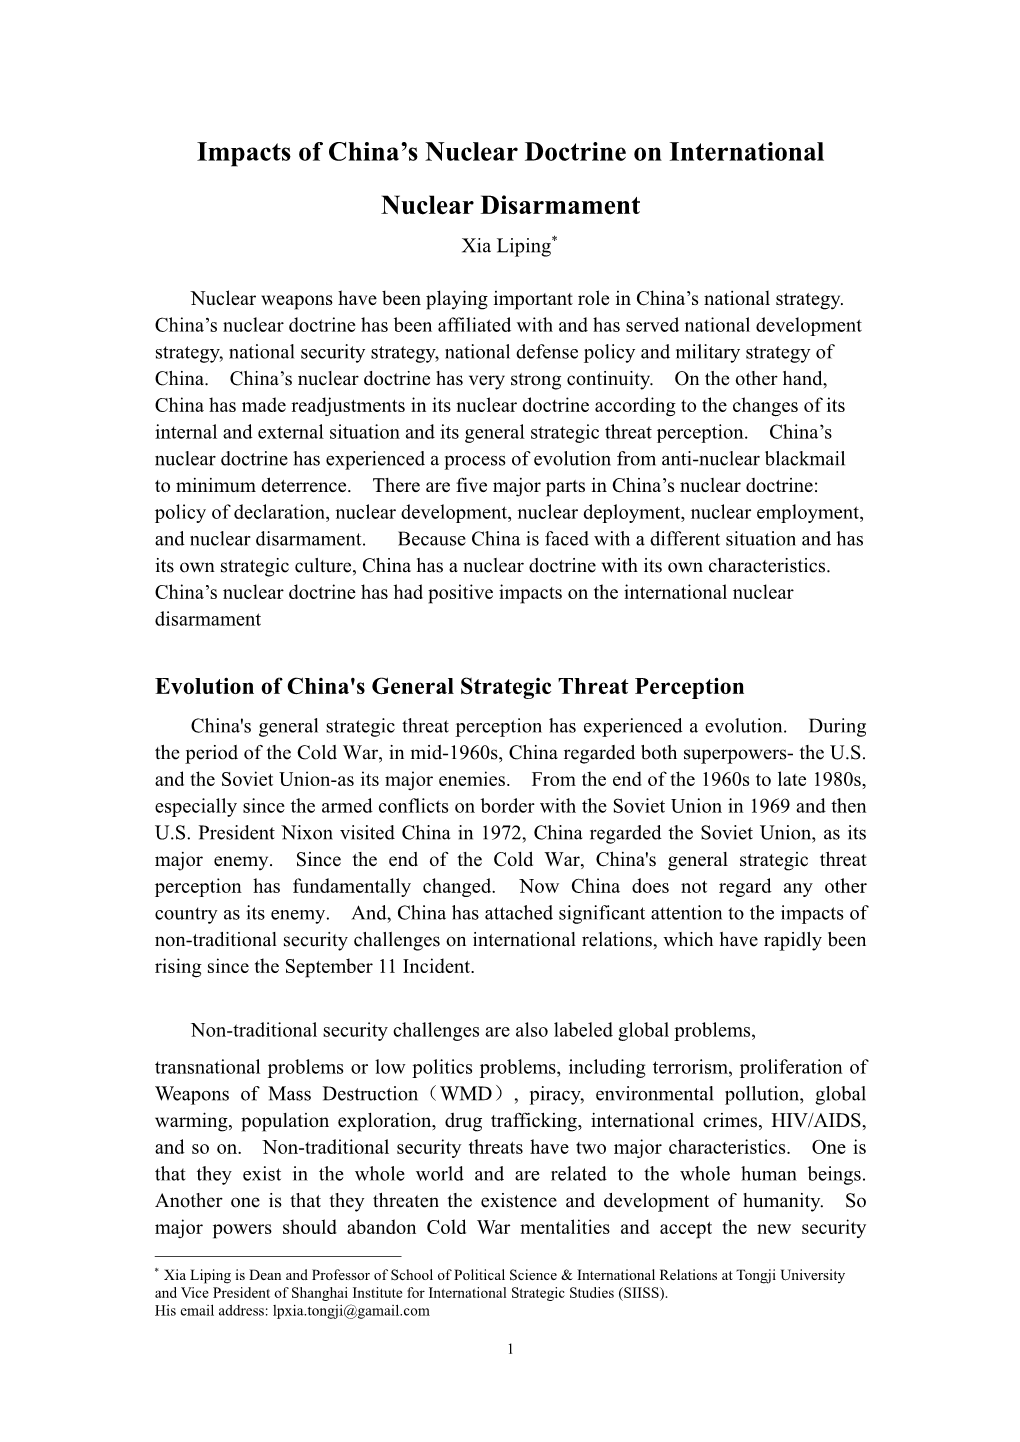 China's Nuclear Doctrine and International Strategic Stability